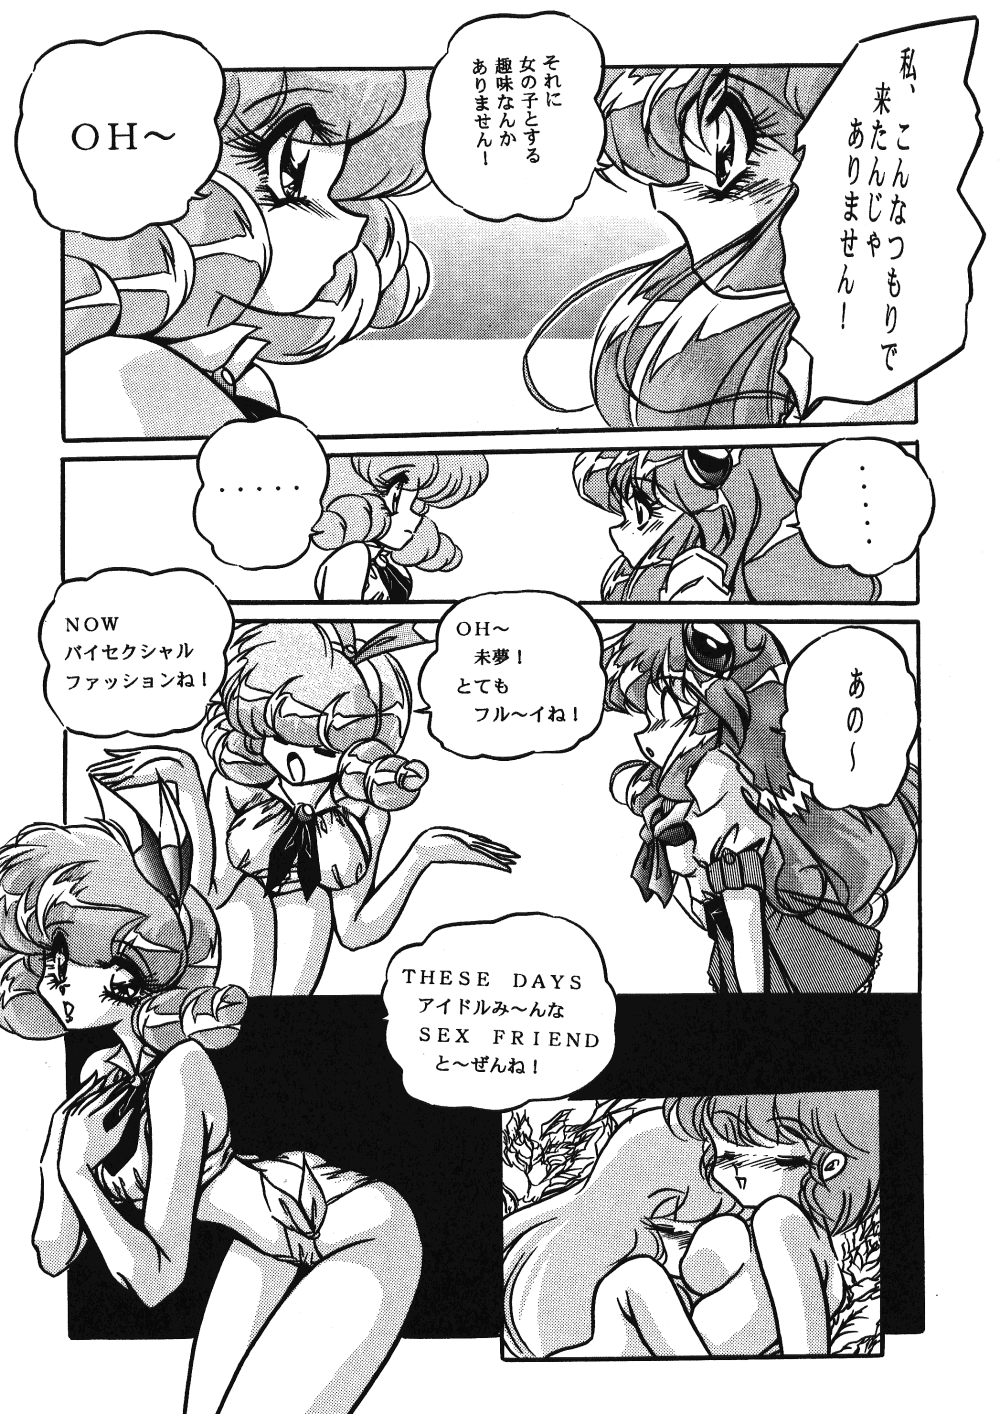 [C-COMPANY] C-COMPANY SPECIAL STAGE 18 (Ranma 1/2, Idol Project) page 43 full